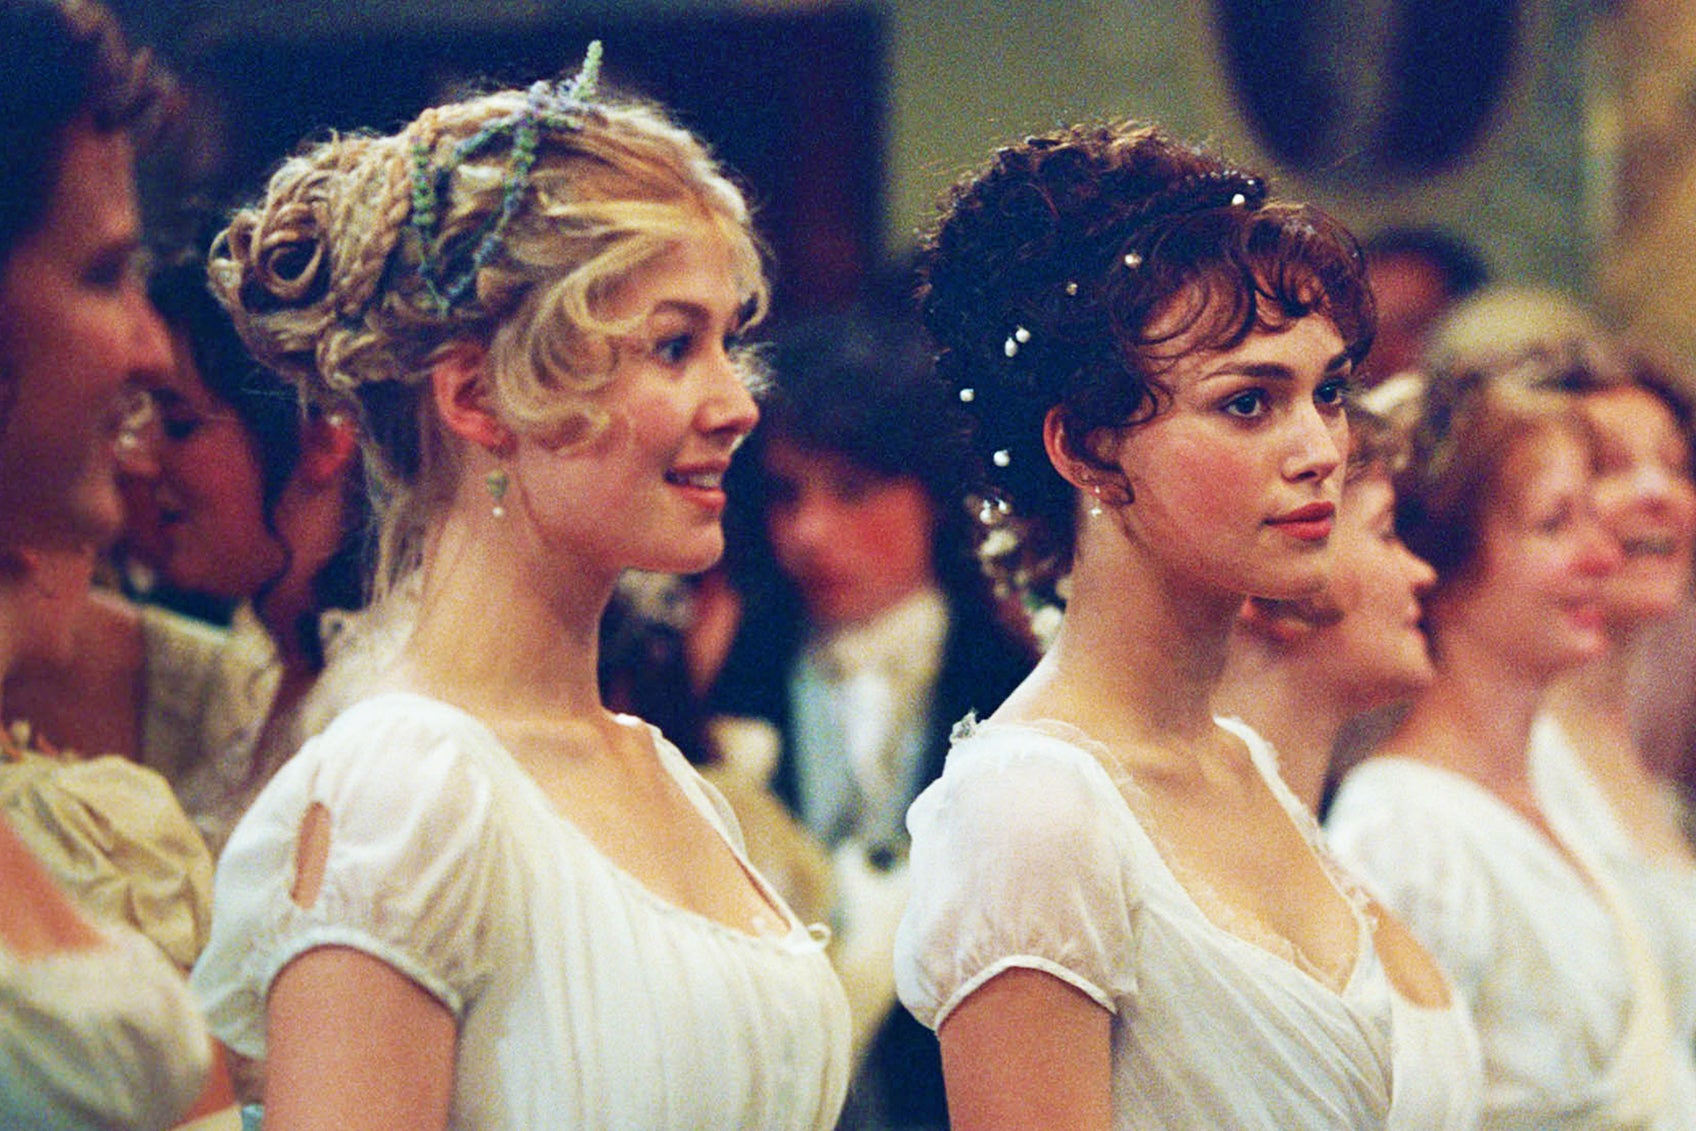 Actors Rosamund Pike and Keira Knightley as Jane Bennet and Elizabeth Bennet, respectively, in 2005 film Pride and Prejudice